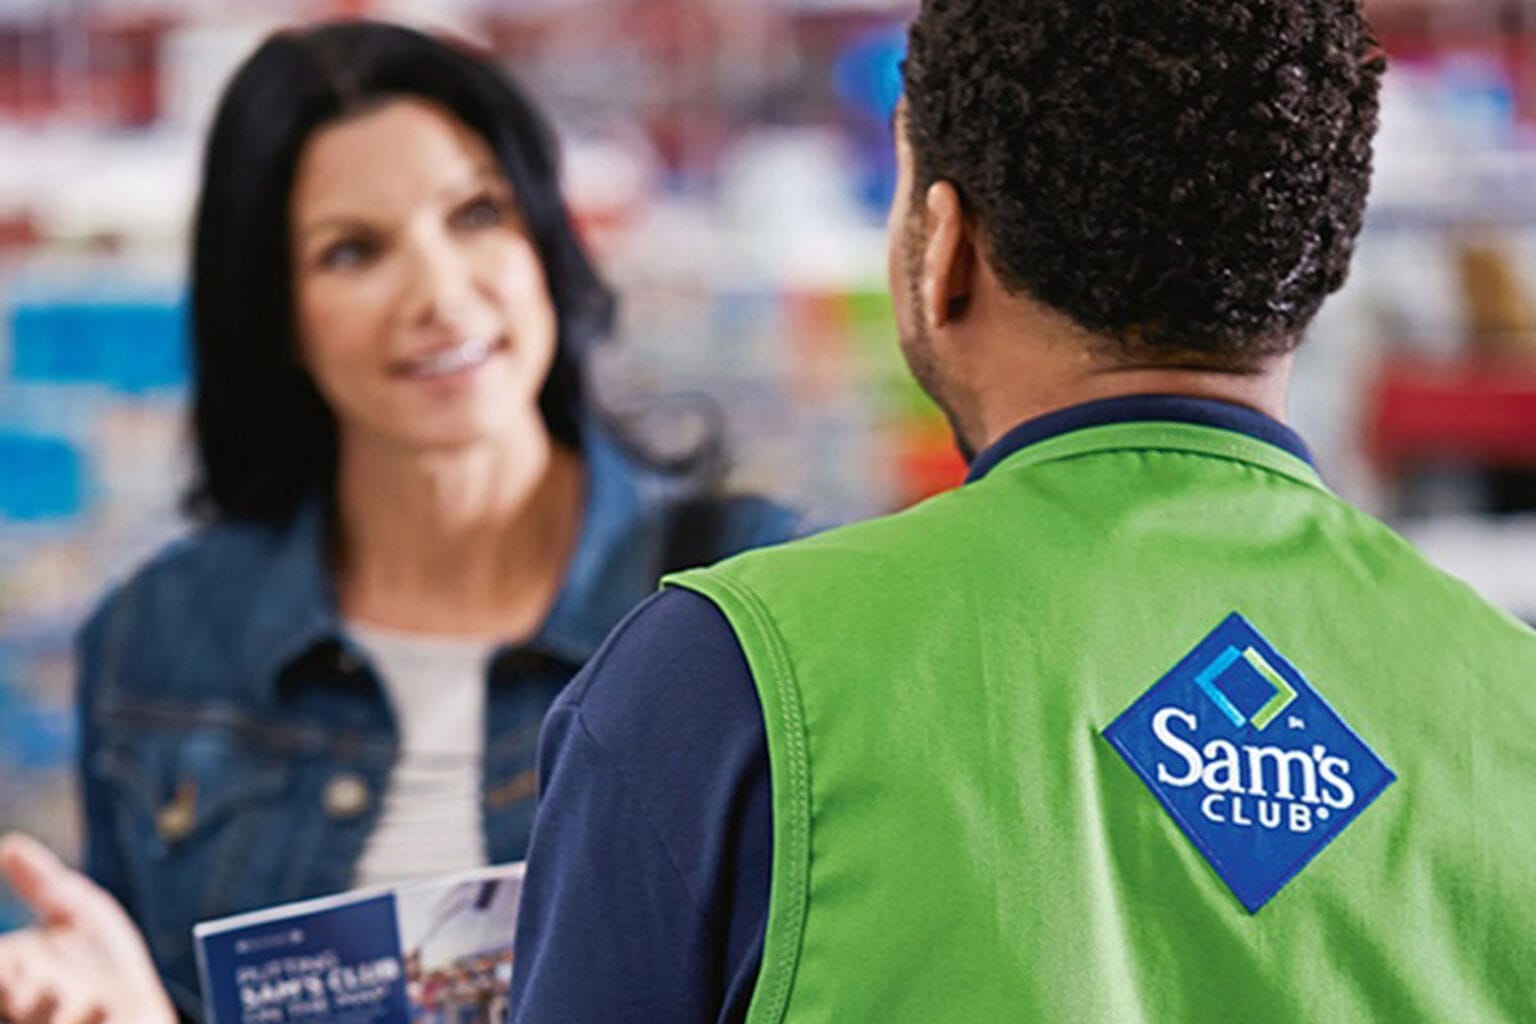 For $20, get 1 year of Sam's club plus dinner and dessert.